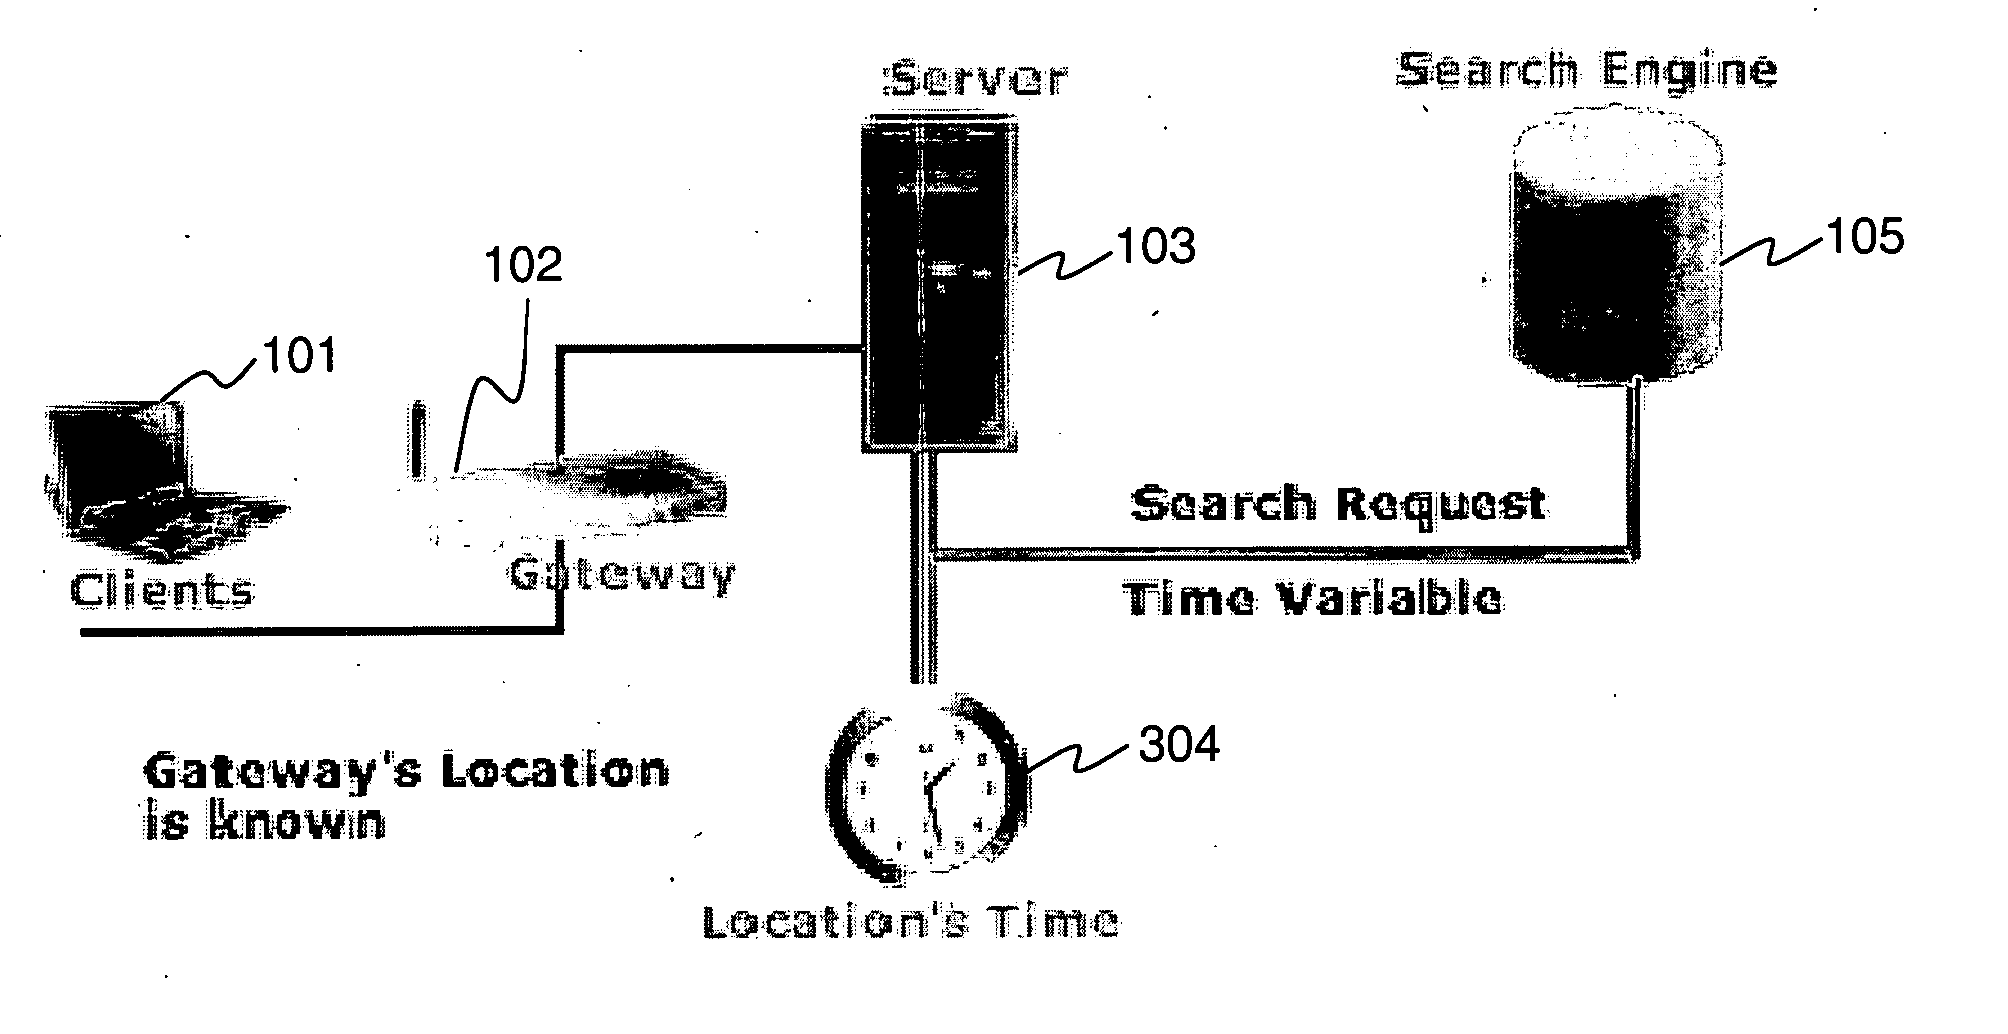 Computerized system and method for advanced advertising